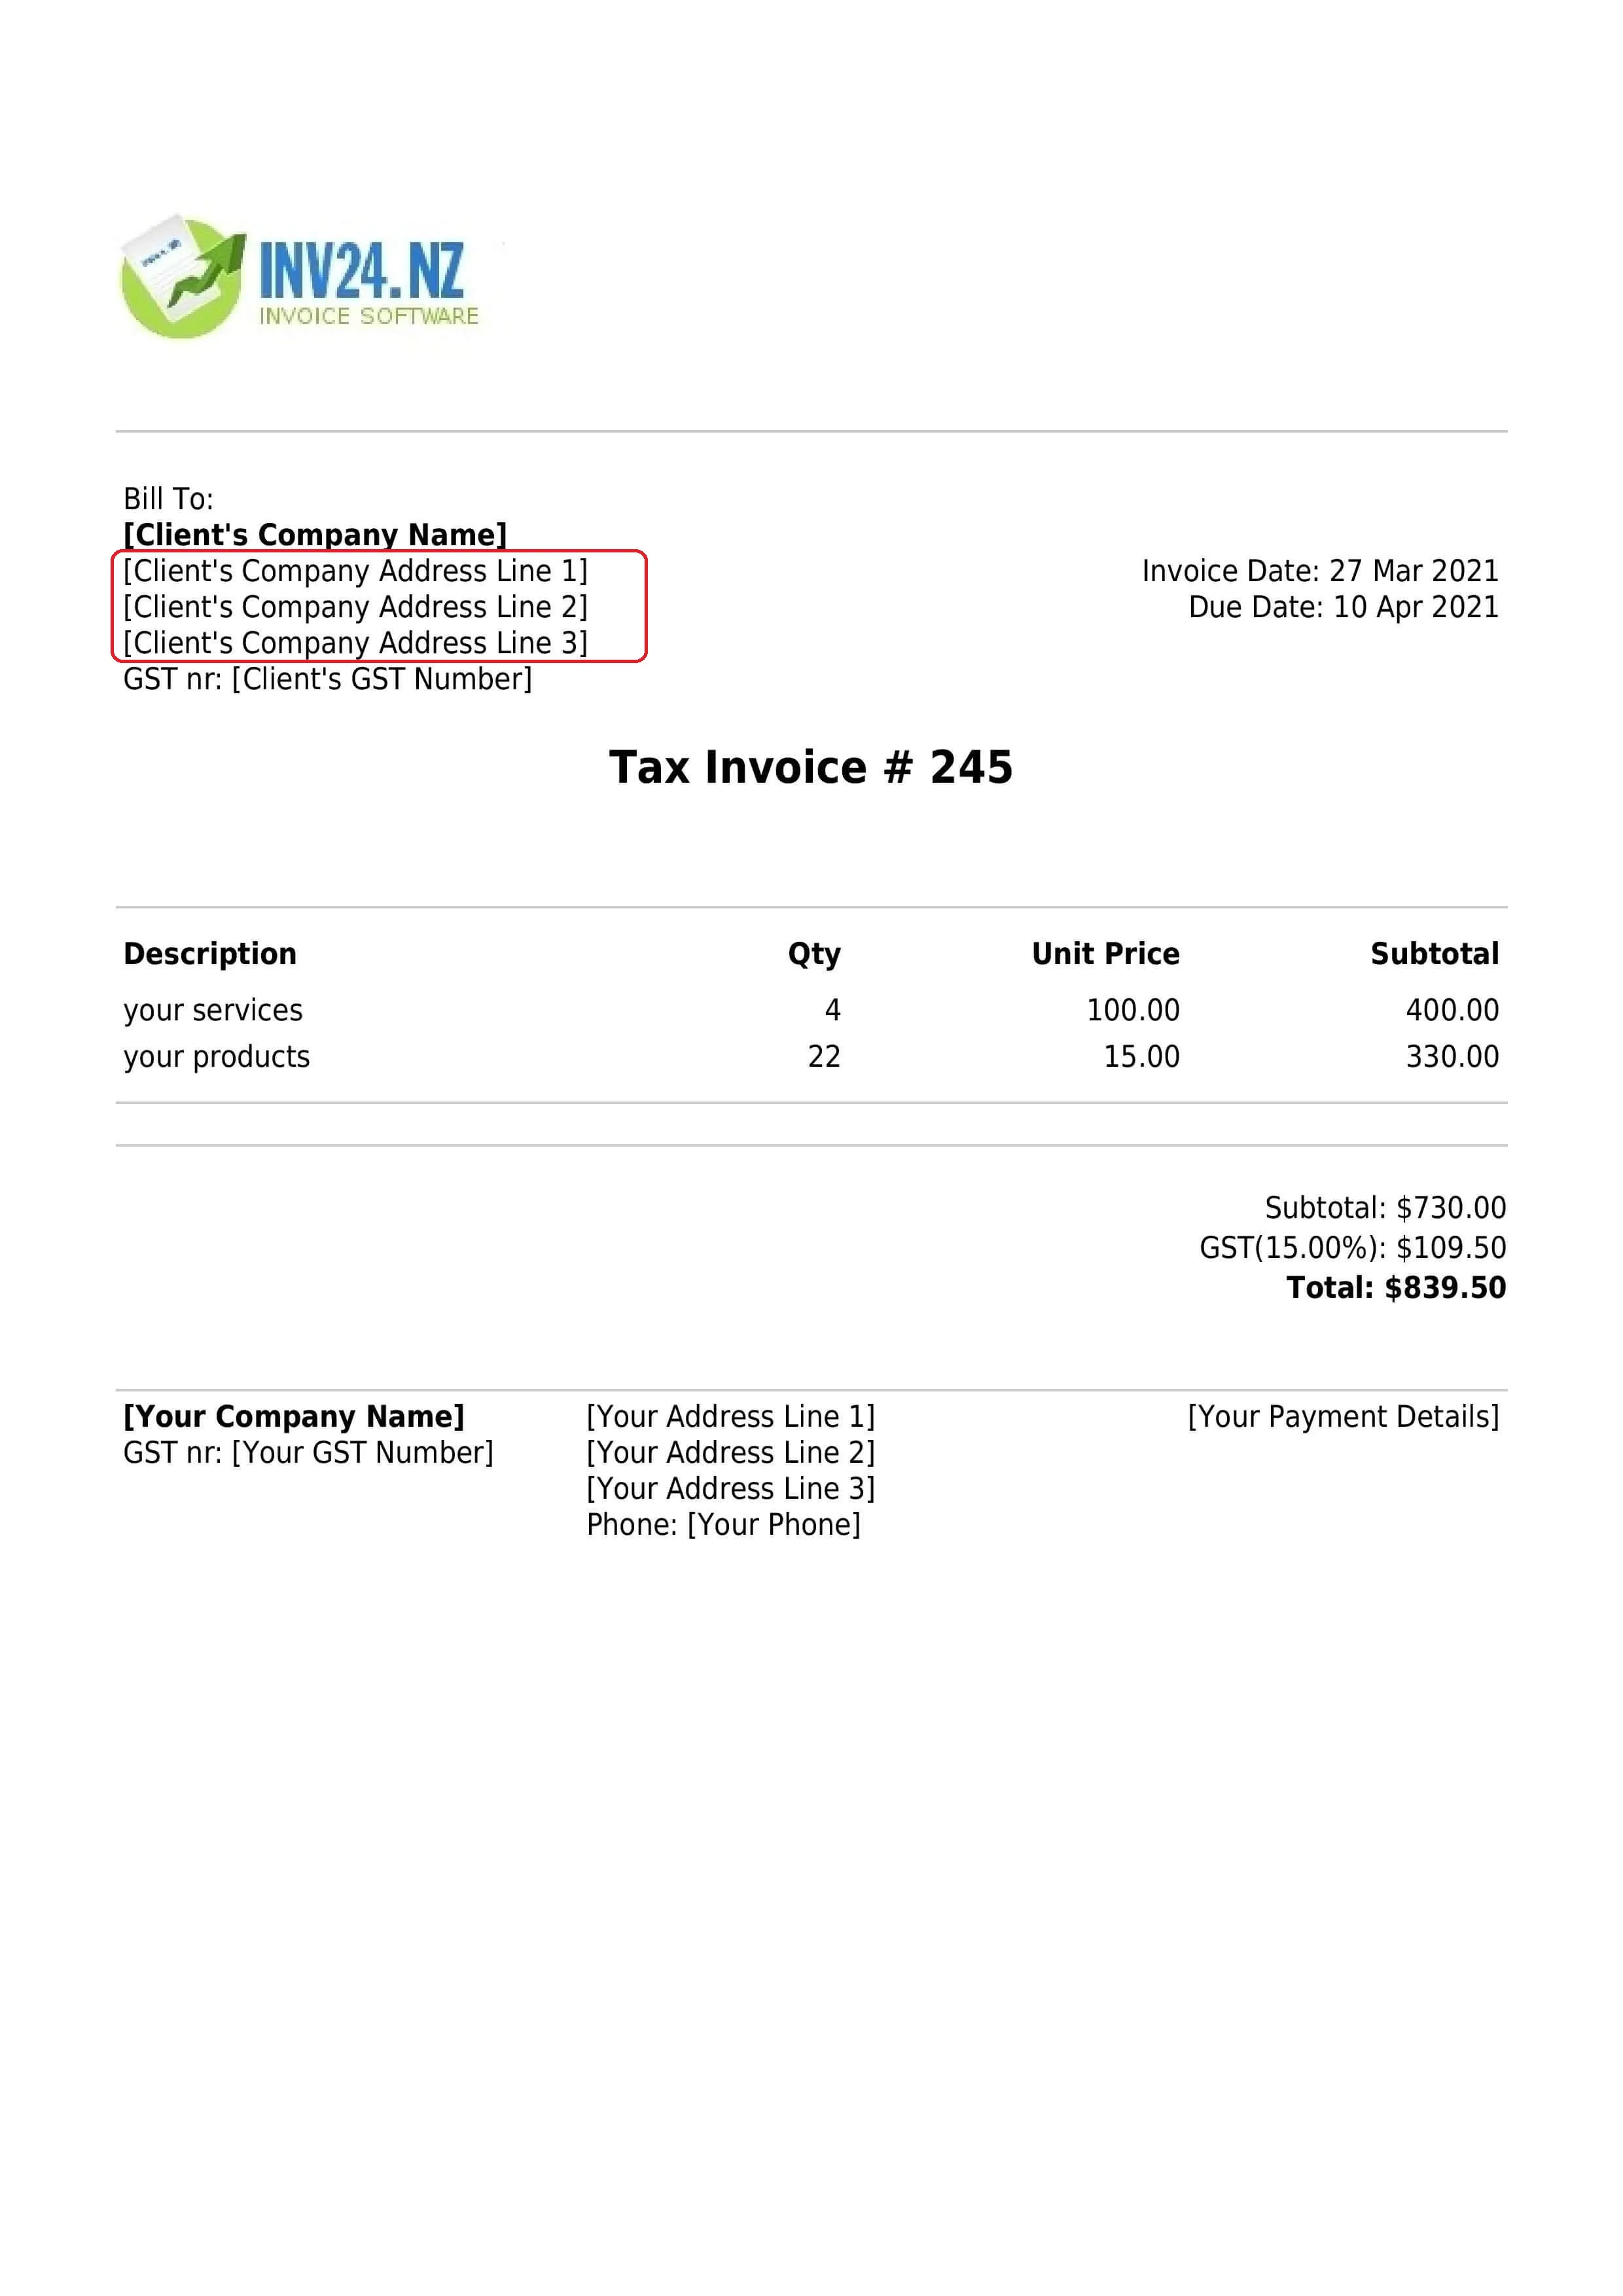 shipping address on the invoice